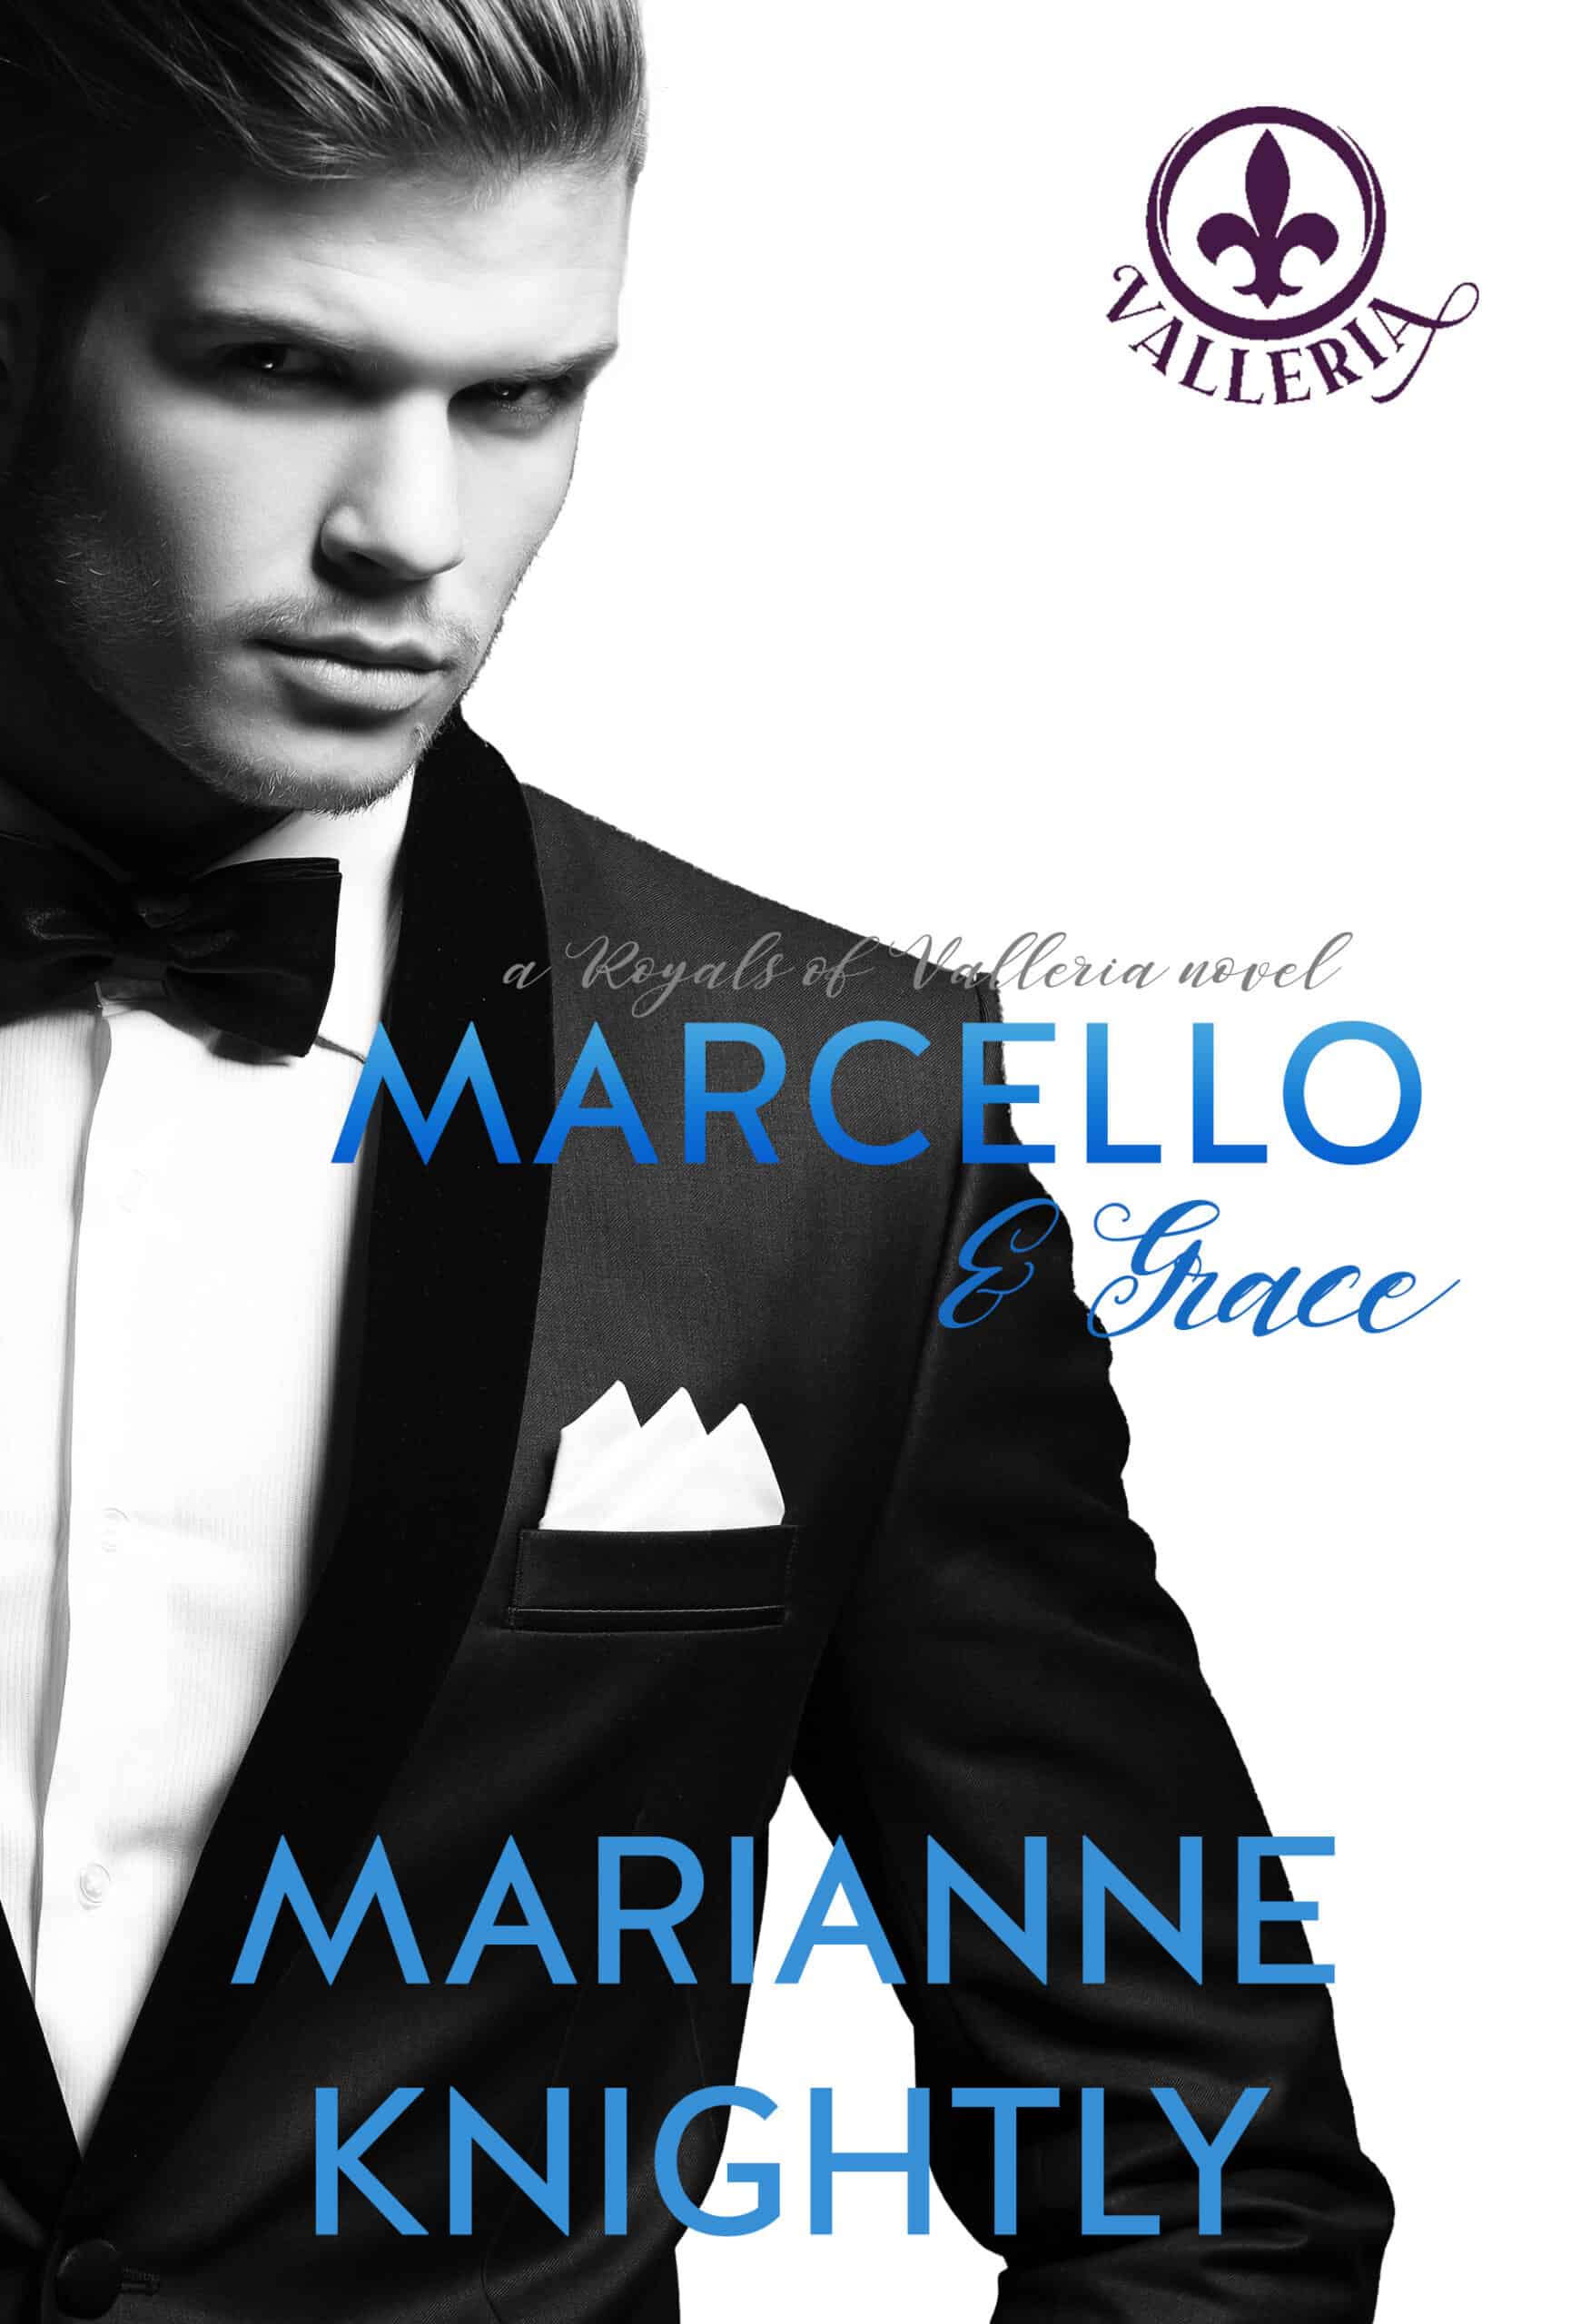 Marcello & Grace (Royals of Valleria #2) by Marianne Knightly